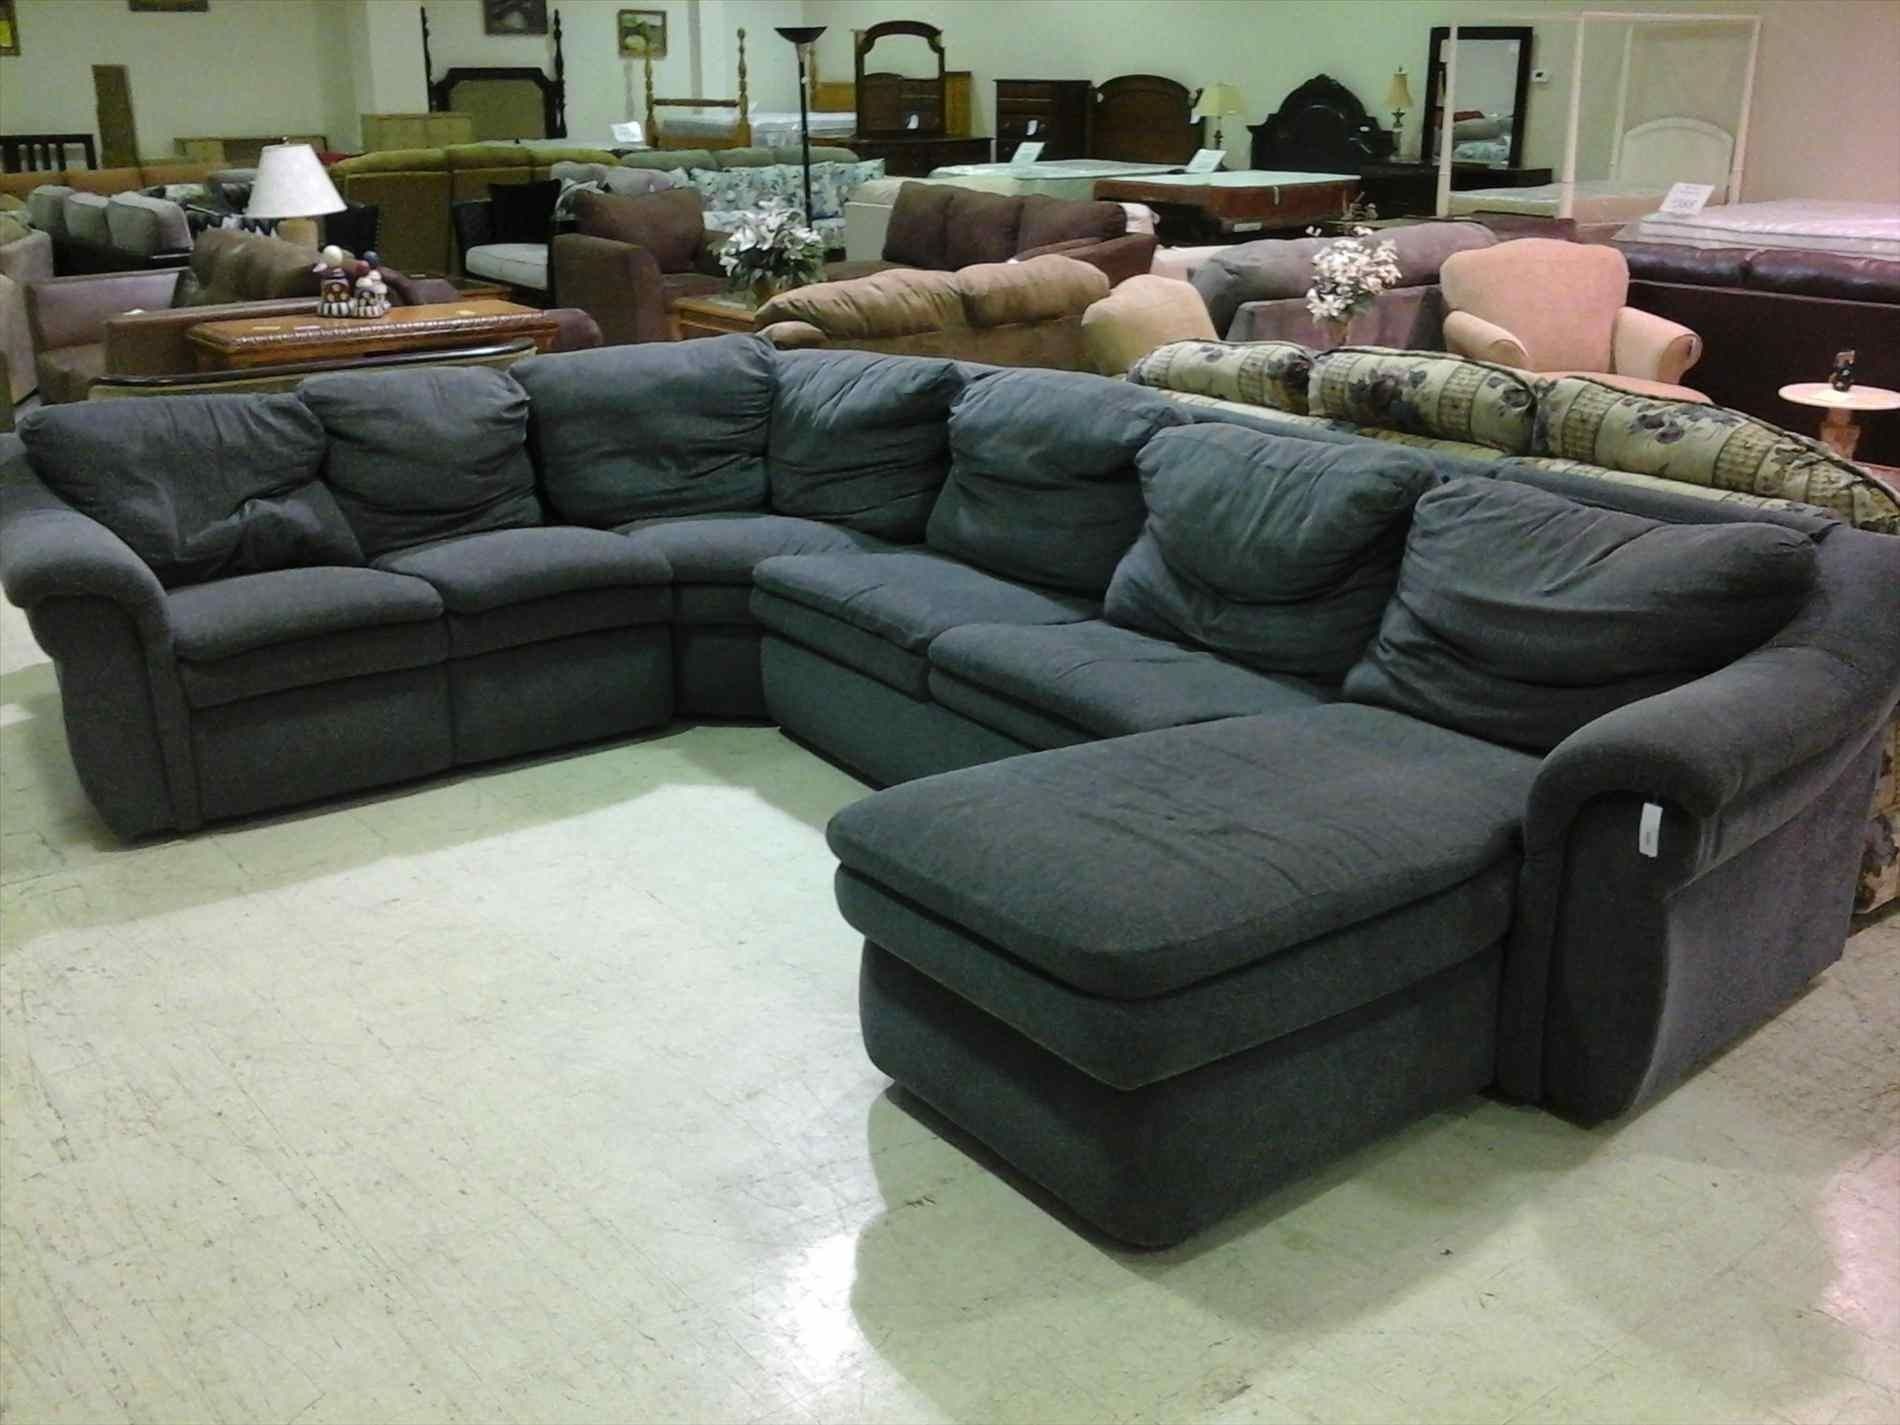 Lovely Sectional Sofa Leather Canada | Sectional Sofas Inside Oakville Sectional Sofas (View 6 of 10)